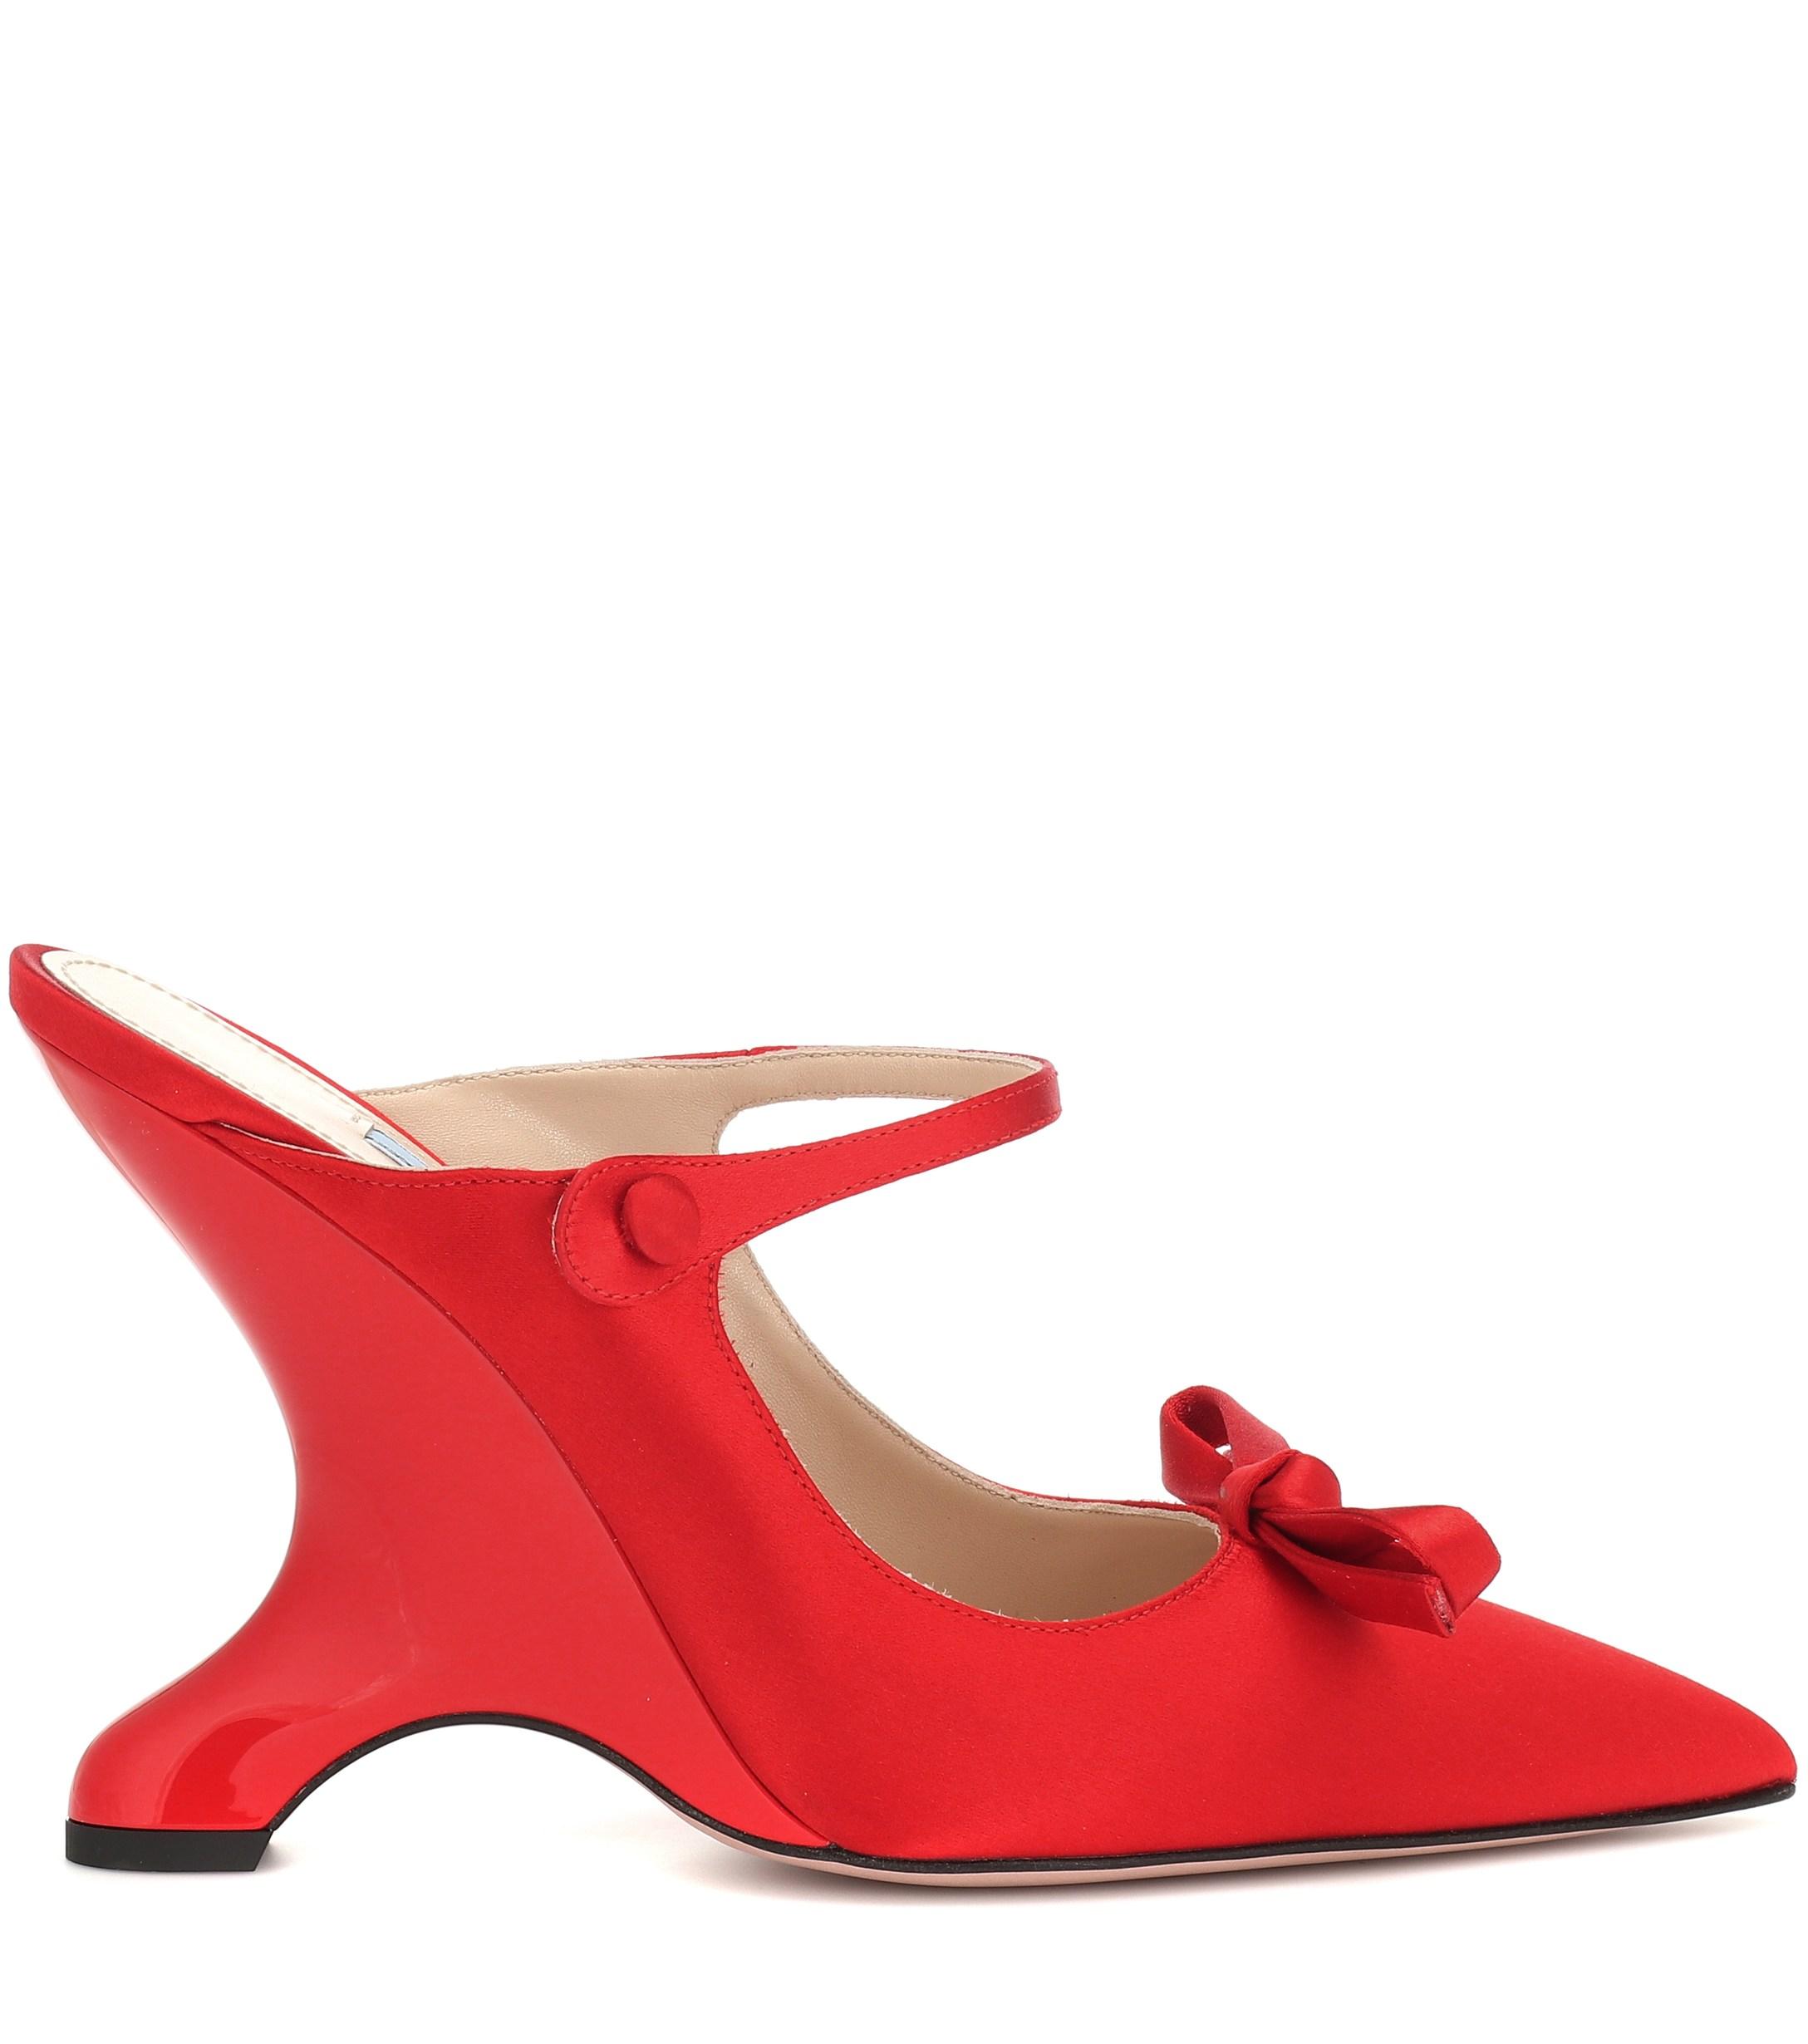 Prada Angled Heel Satin Pumps in Red | Lyst